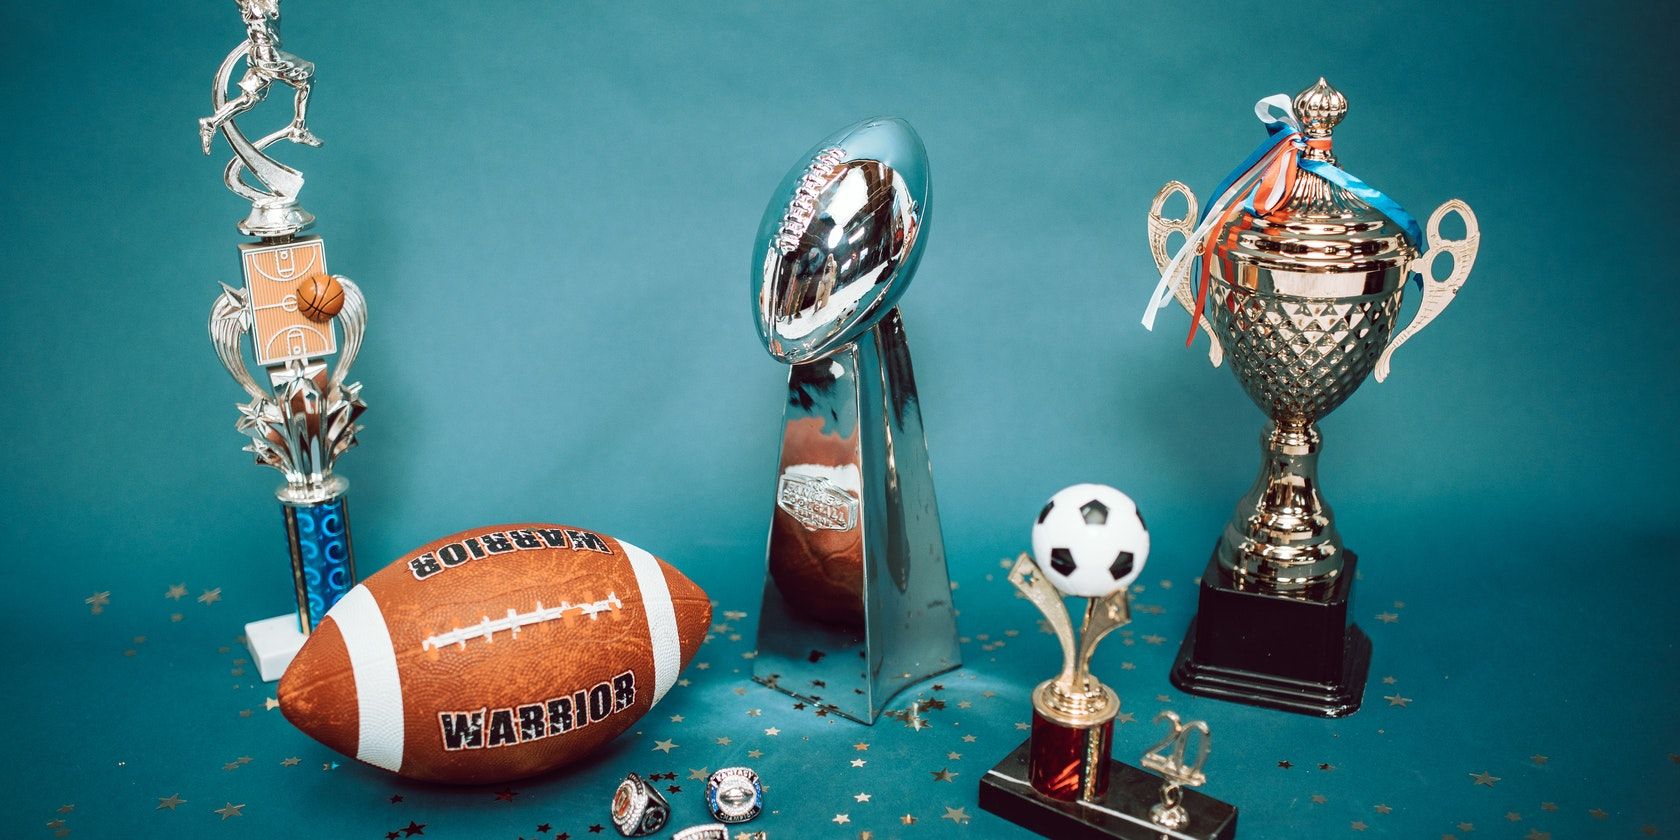 superbowl ball and trophies